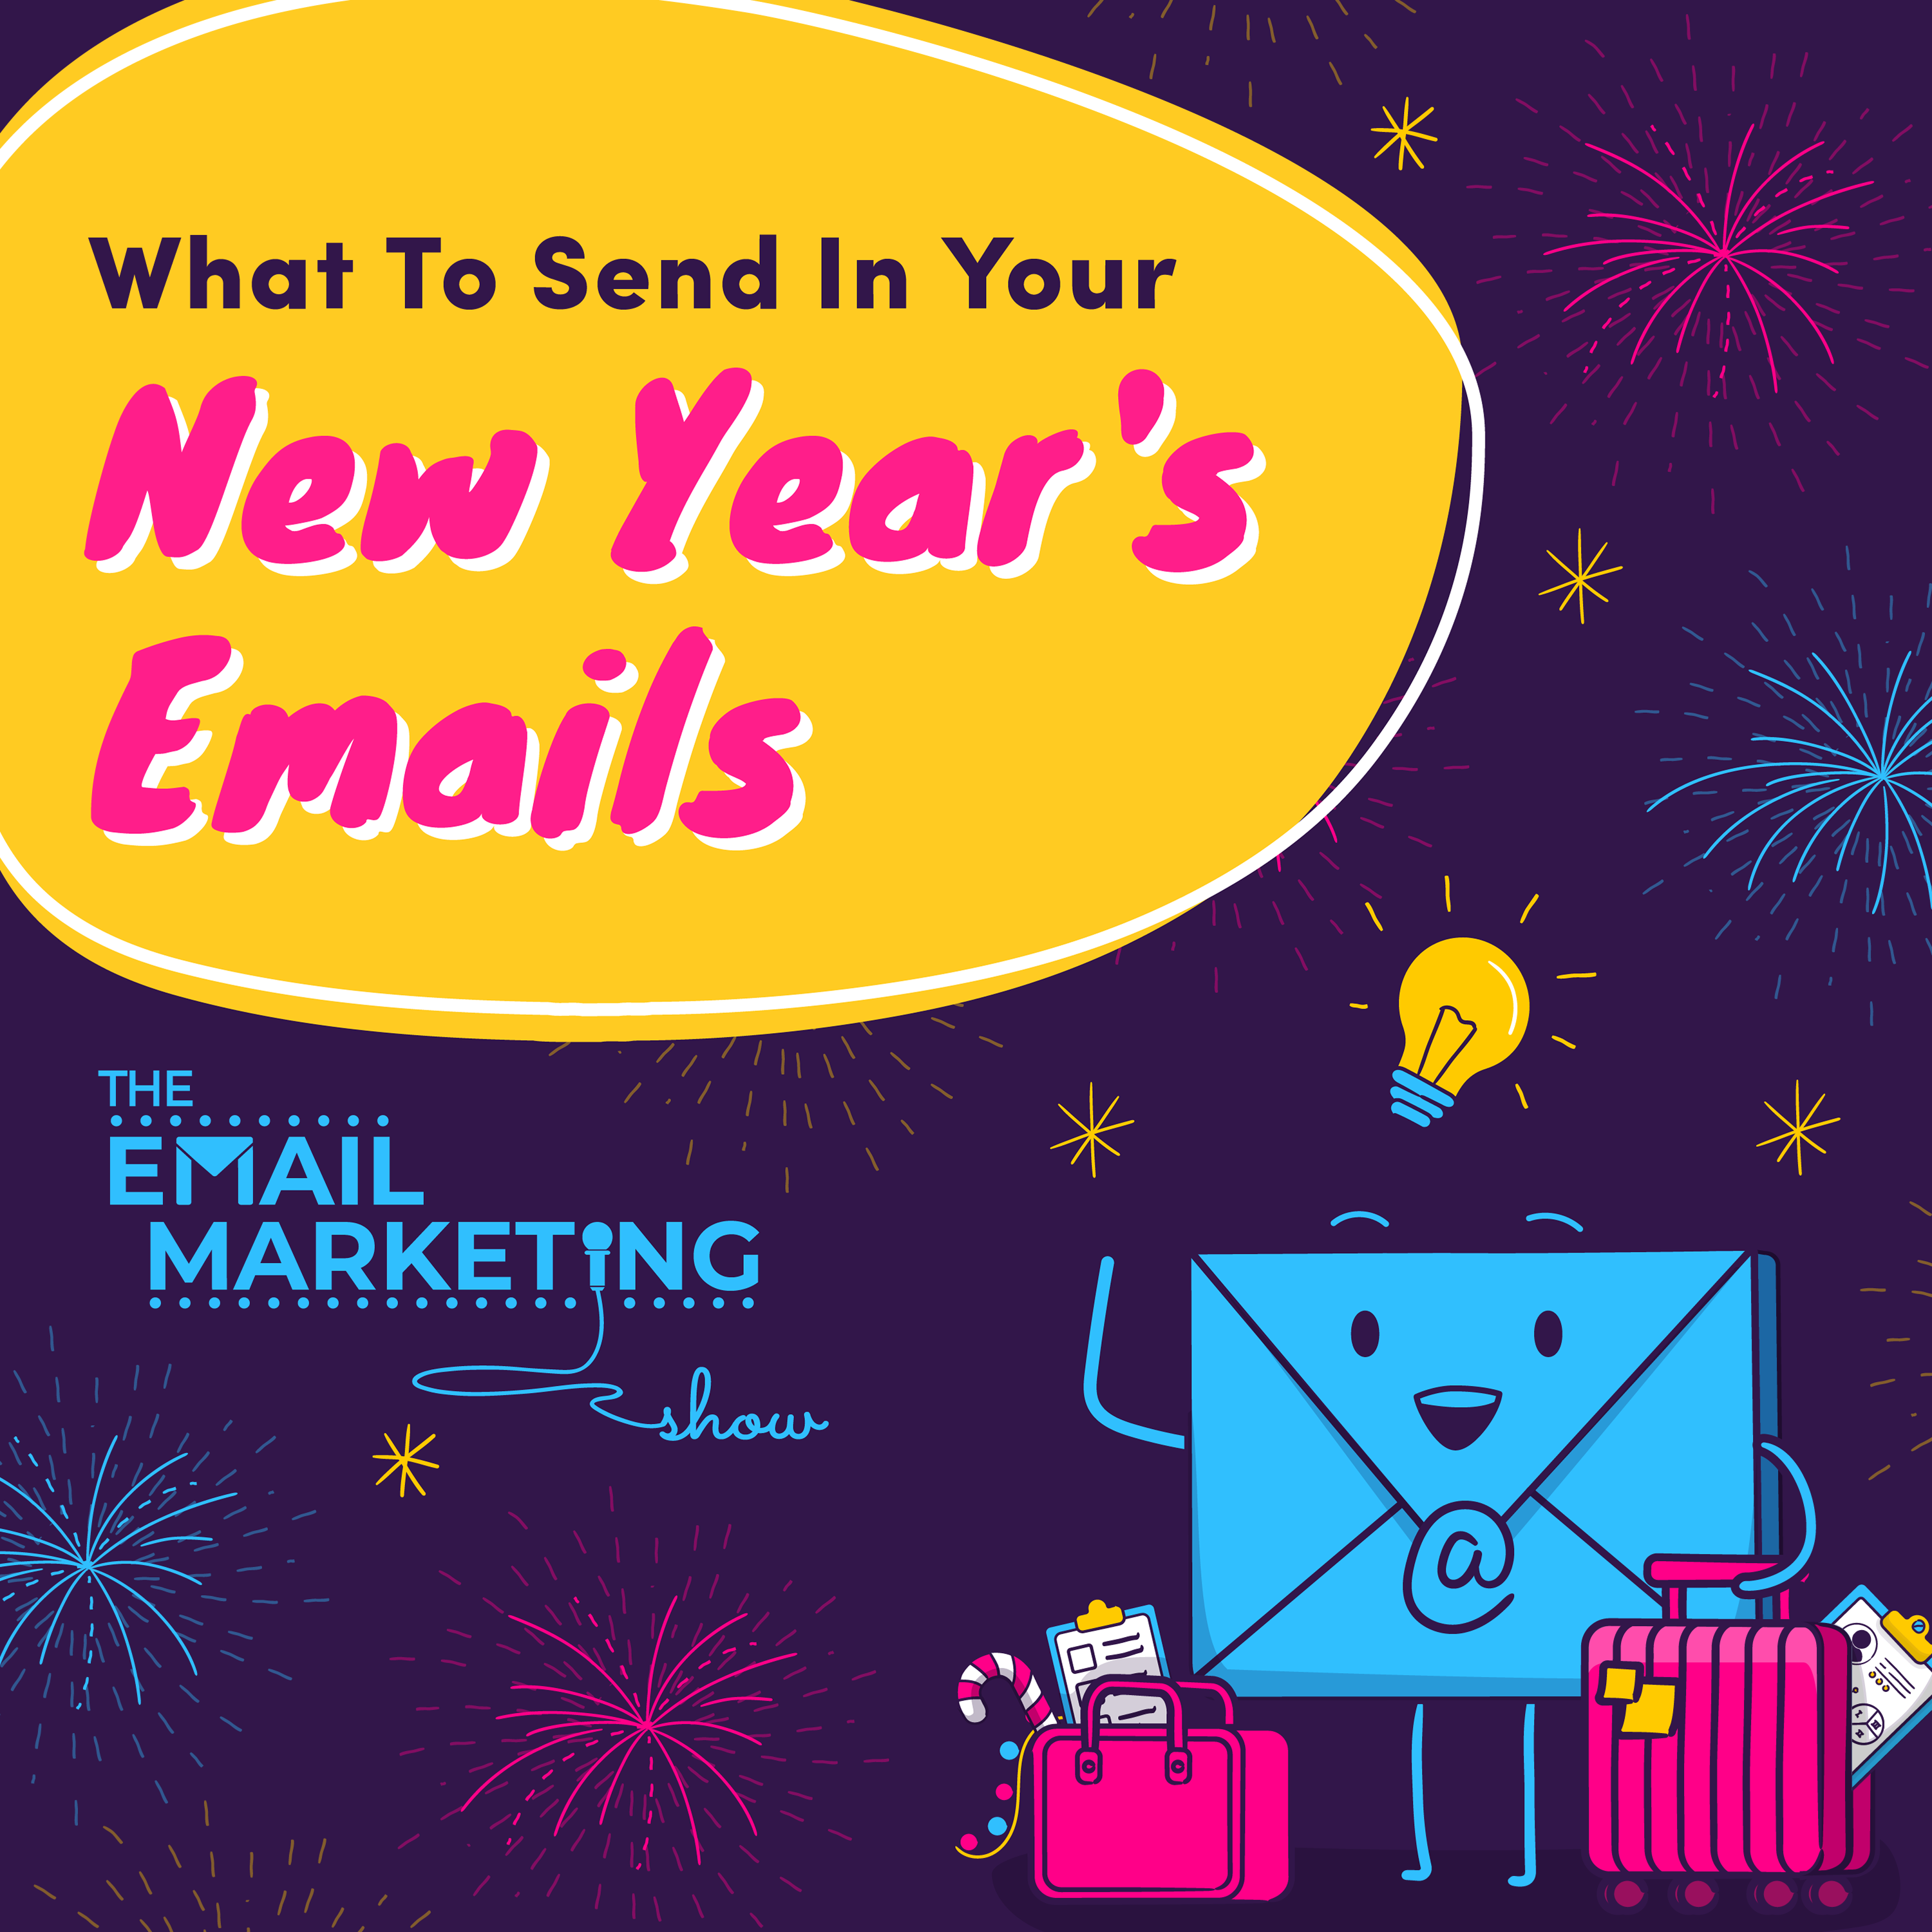 What To Send In Your New Year's Emails To Get Your Clients Excited About Your Business (And Buy From You)